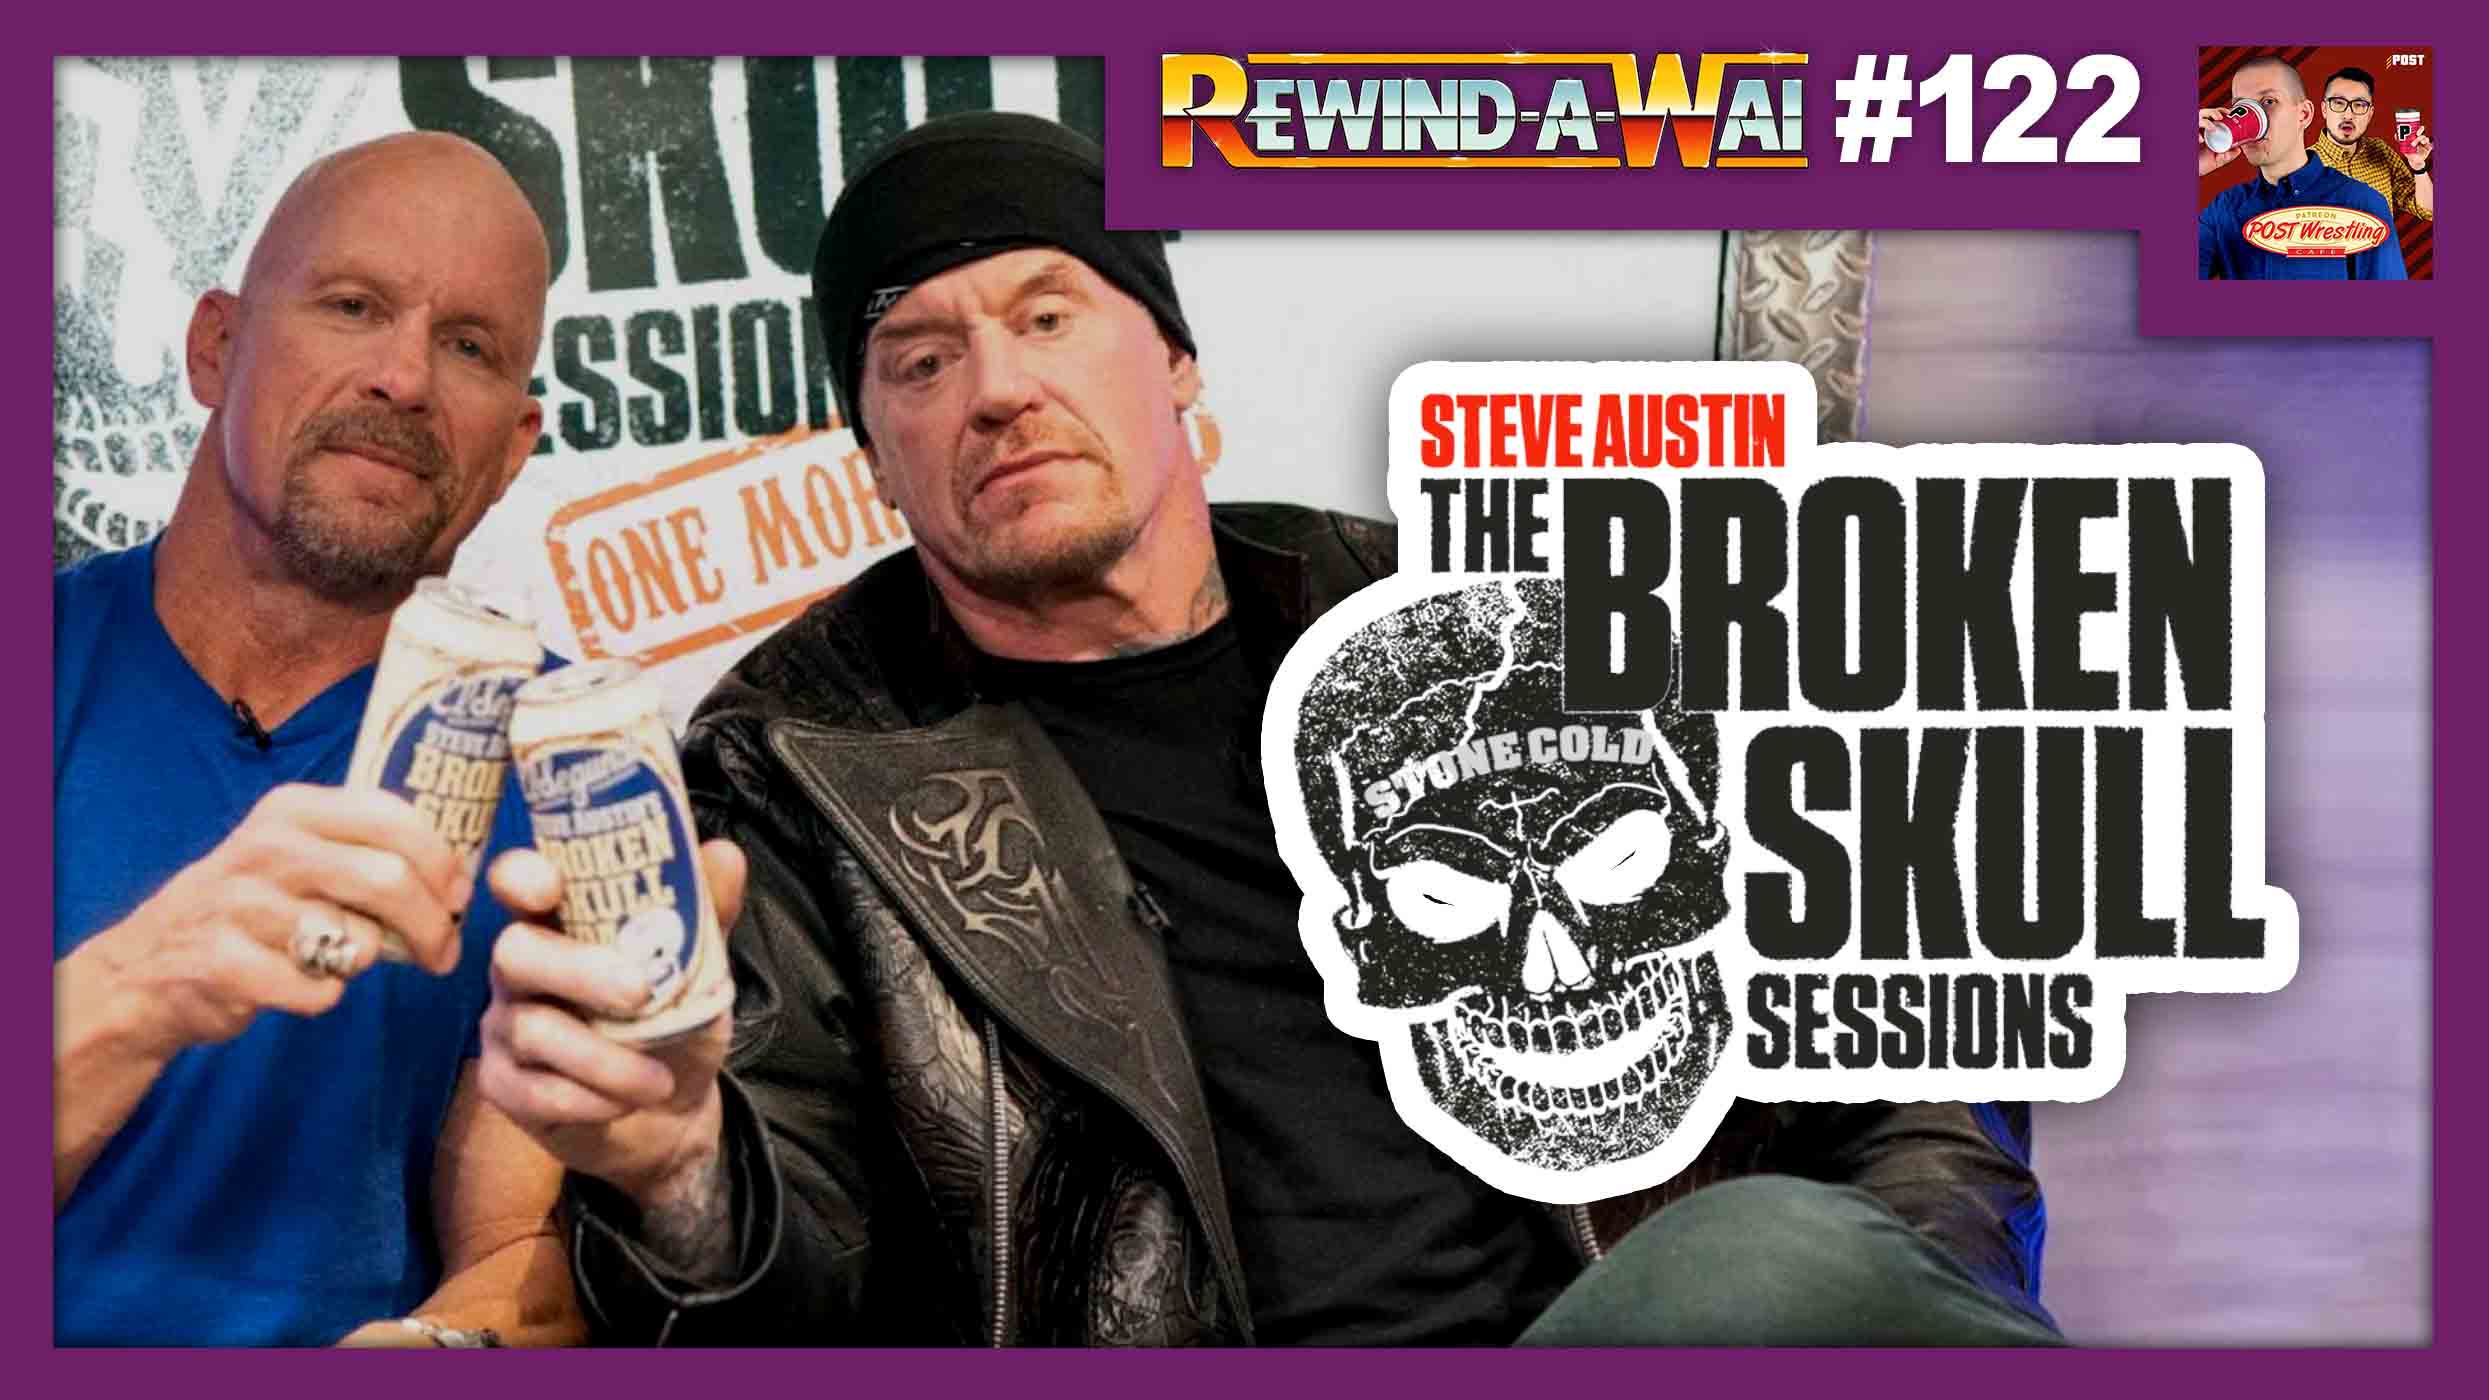 Rewind A Wai 122 The Undertaker One More Round Broken Skull Sessions Post Wrestling Wwe